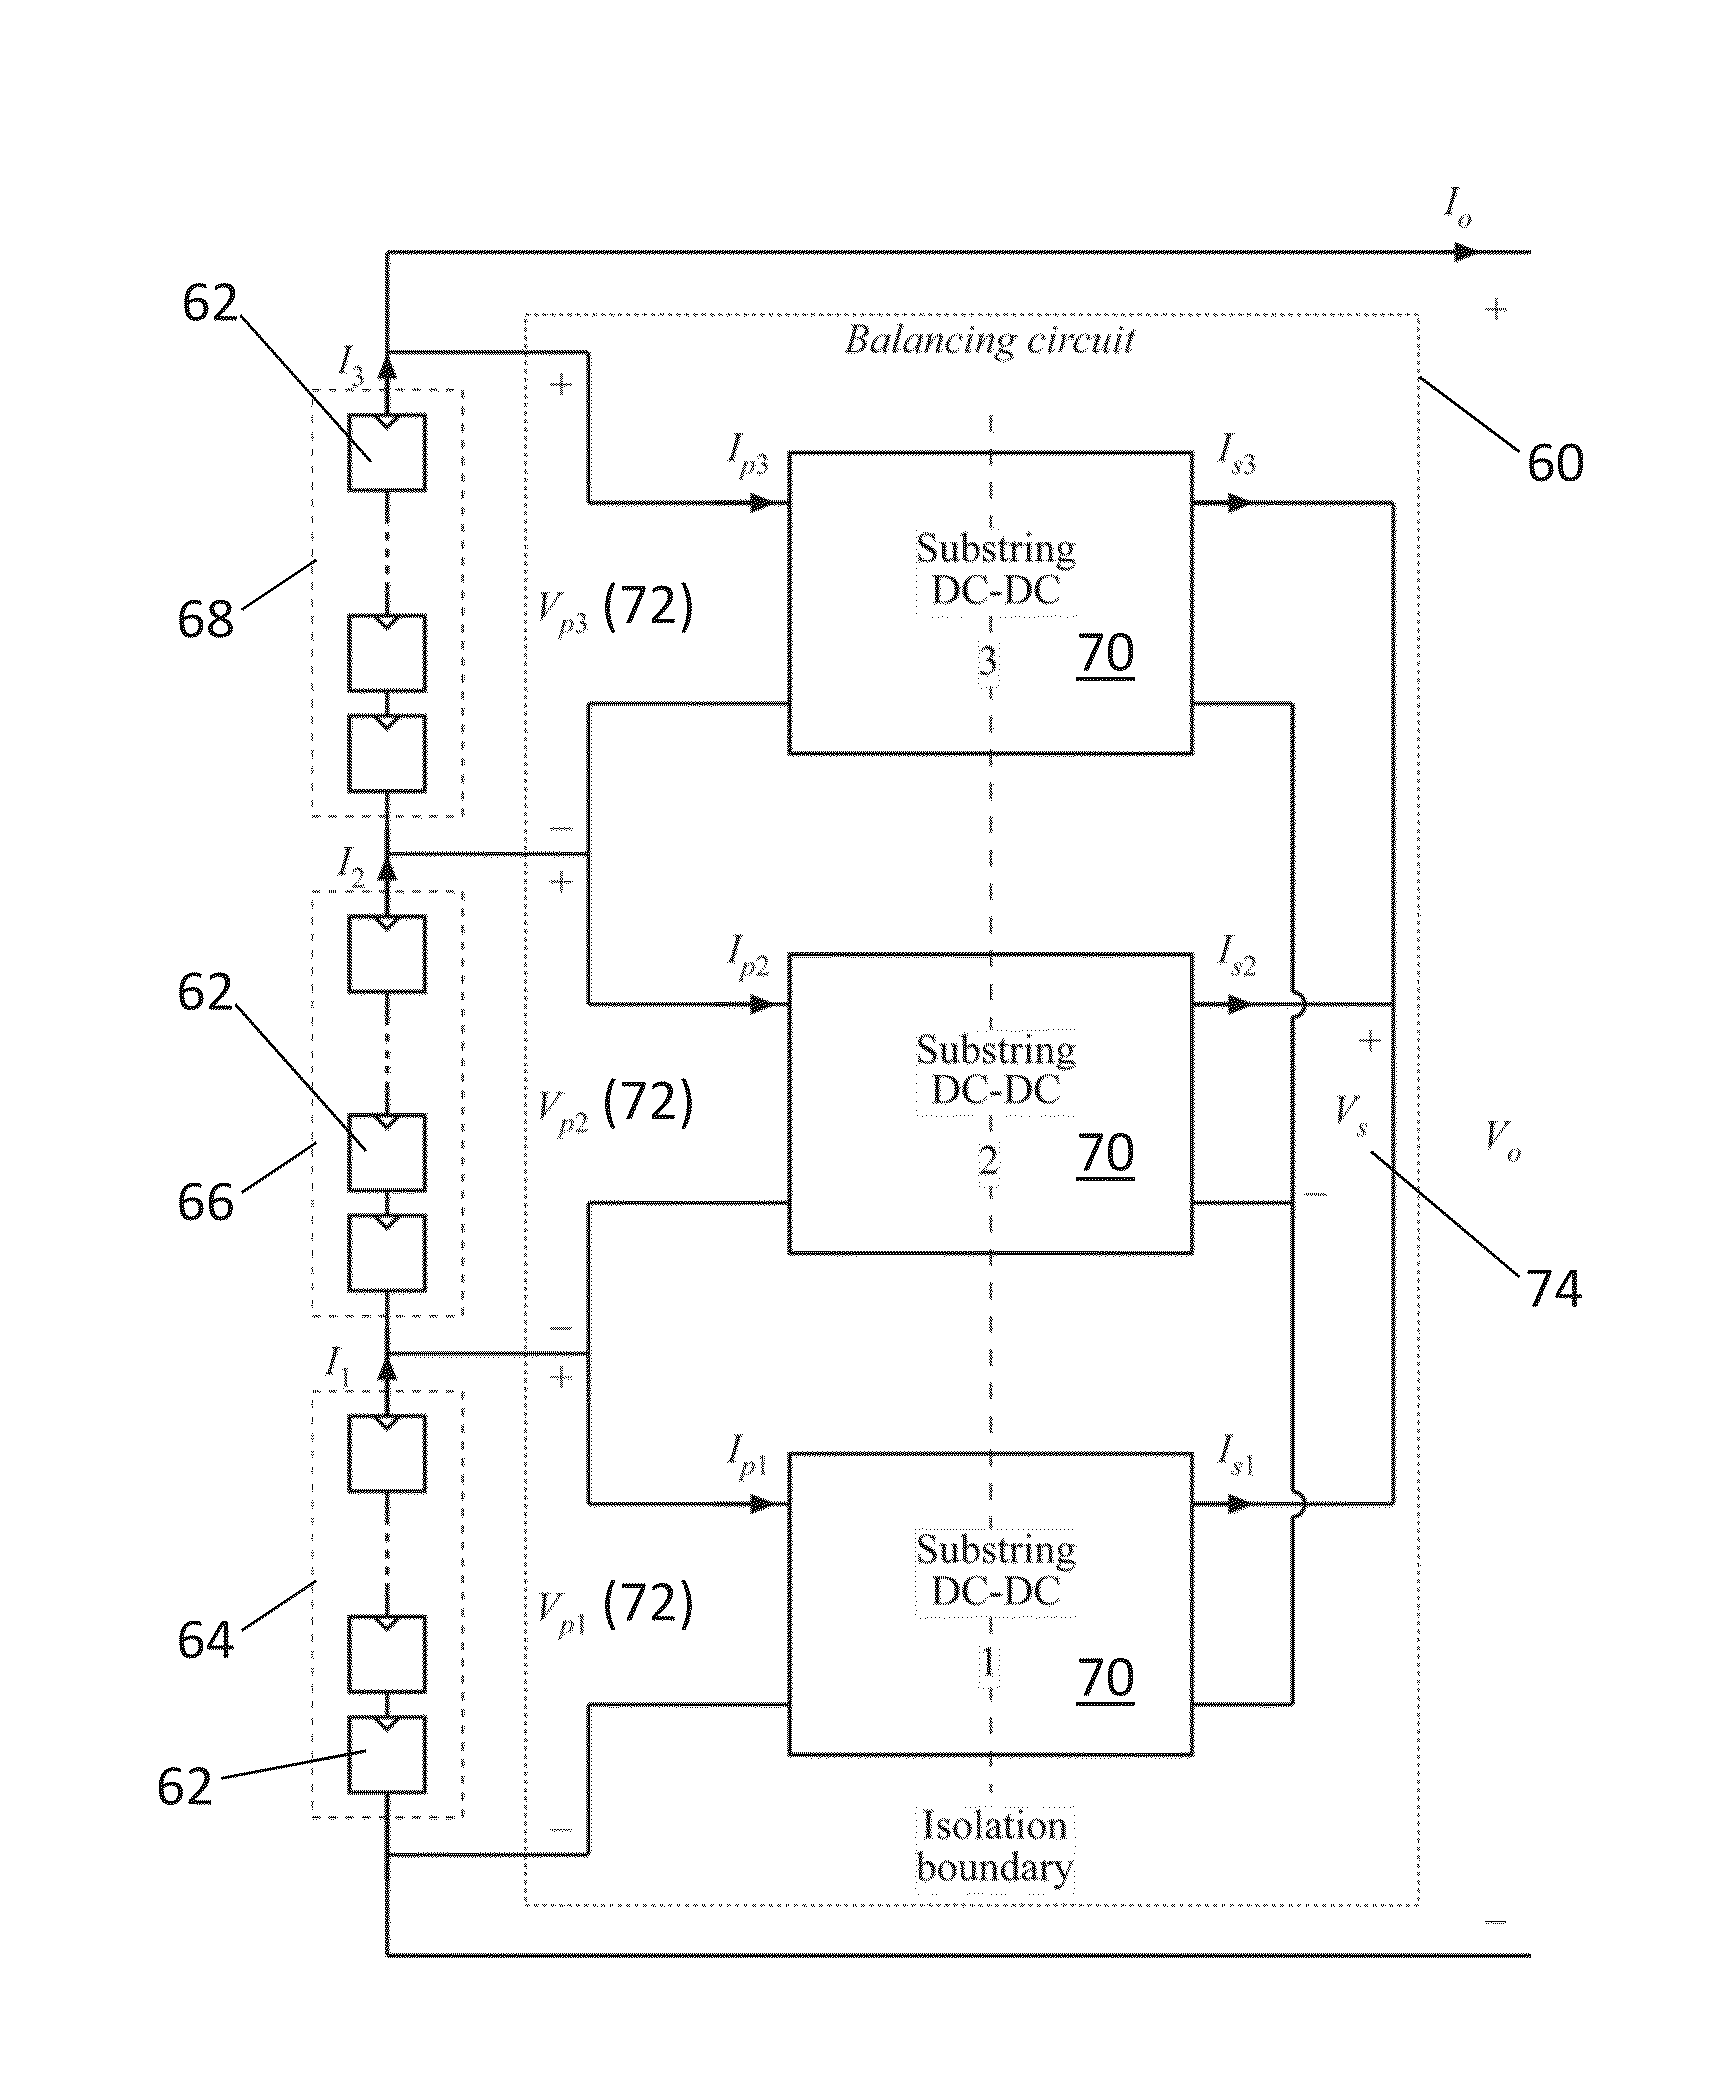 Balancing, filtering and/or controlling series-connected cells